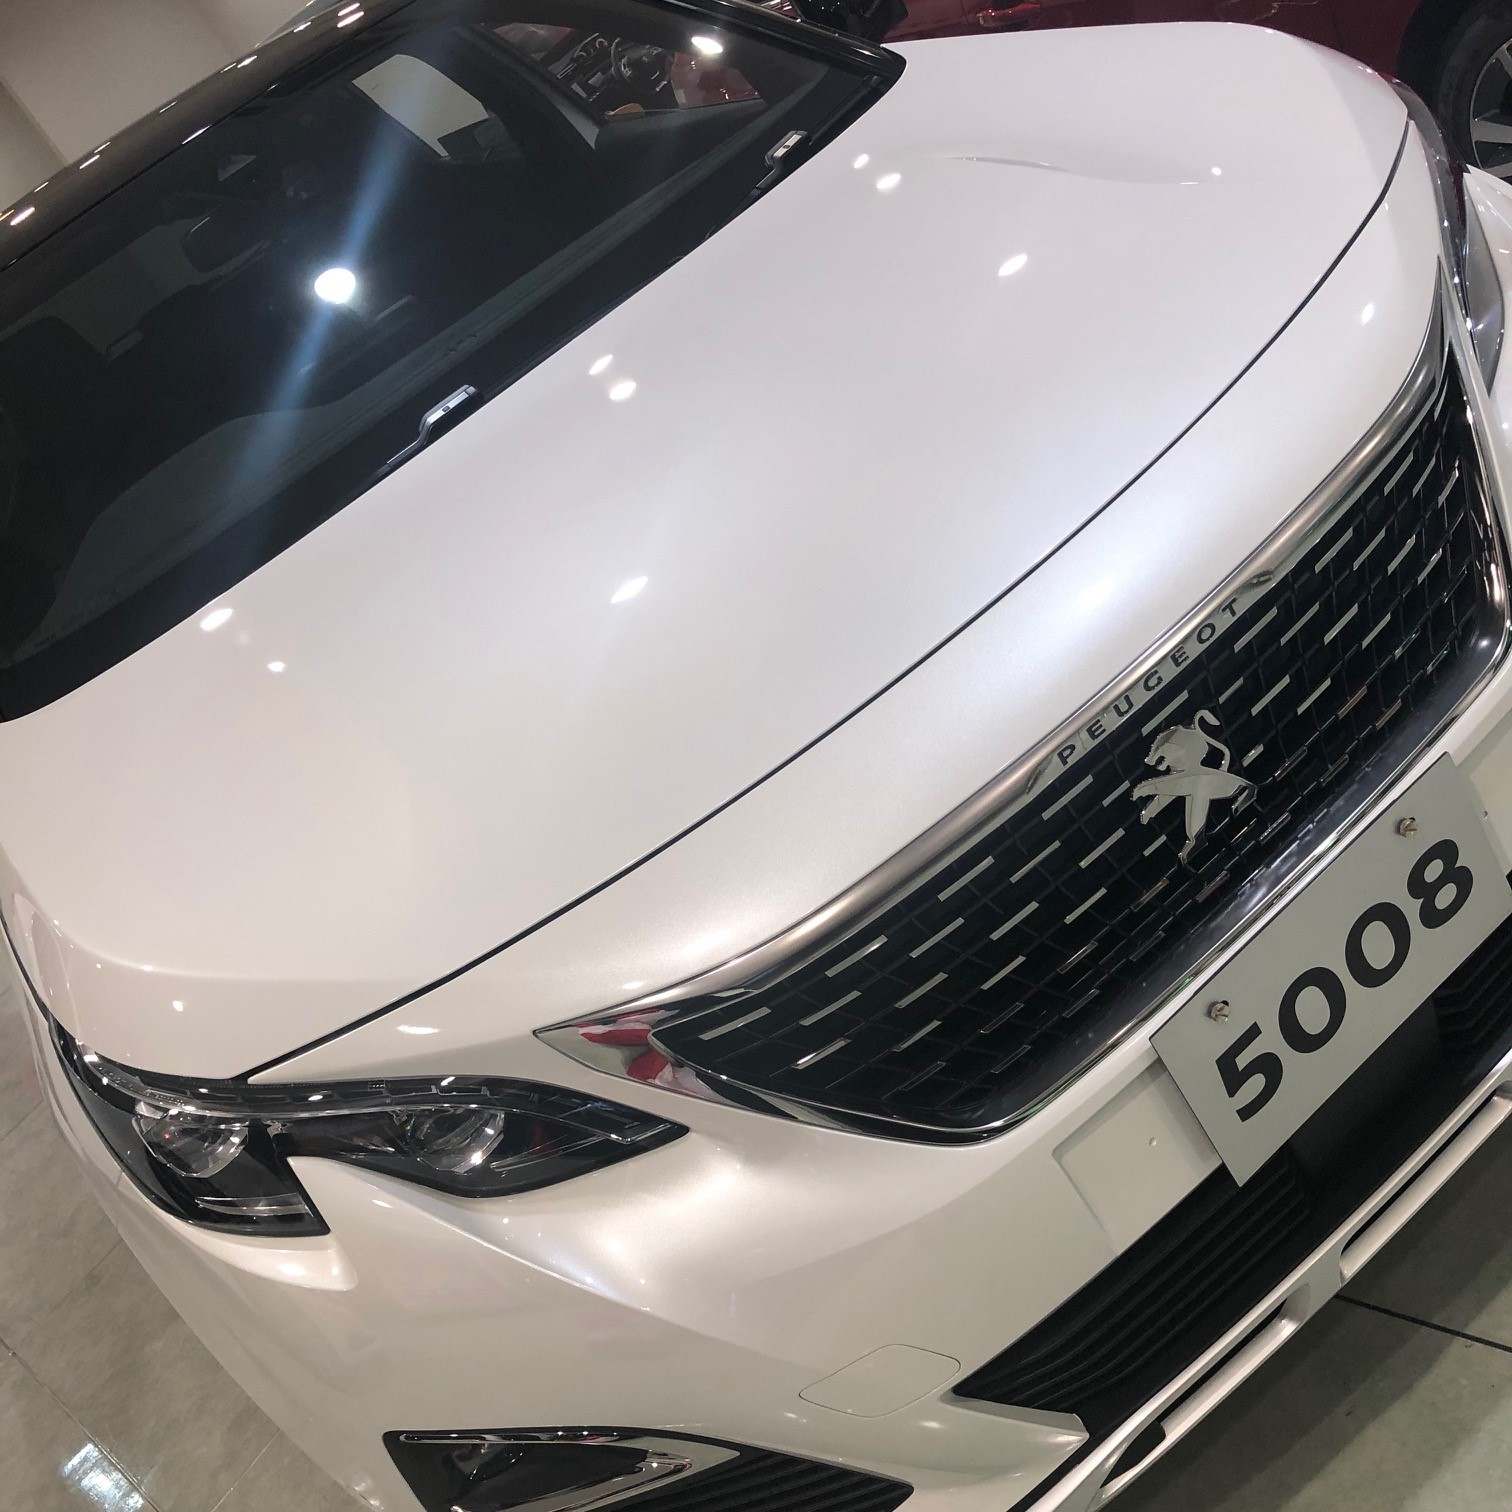 ☆　NEW PEUGEOT 3008/5008 GT Line Blue HDi Special Edition ☆